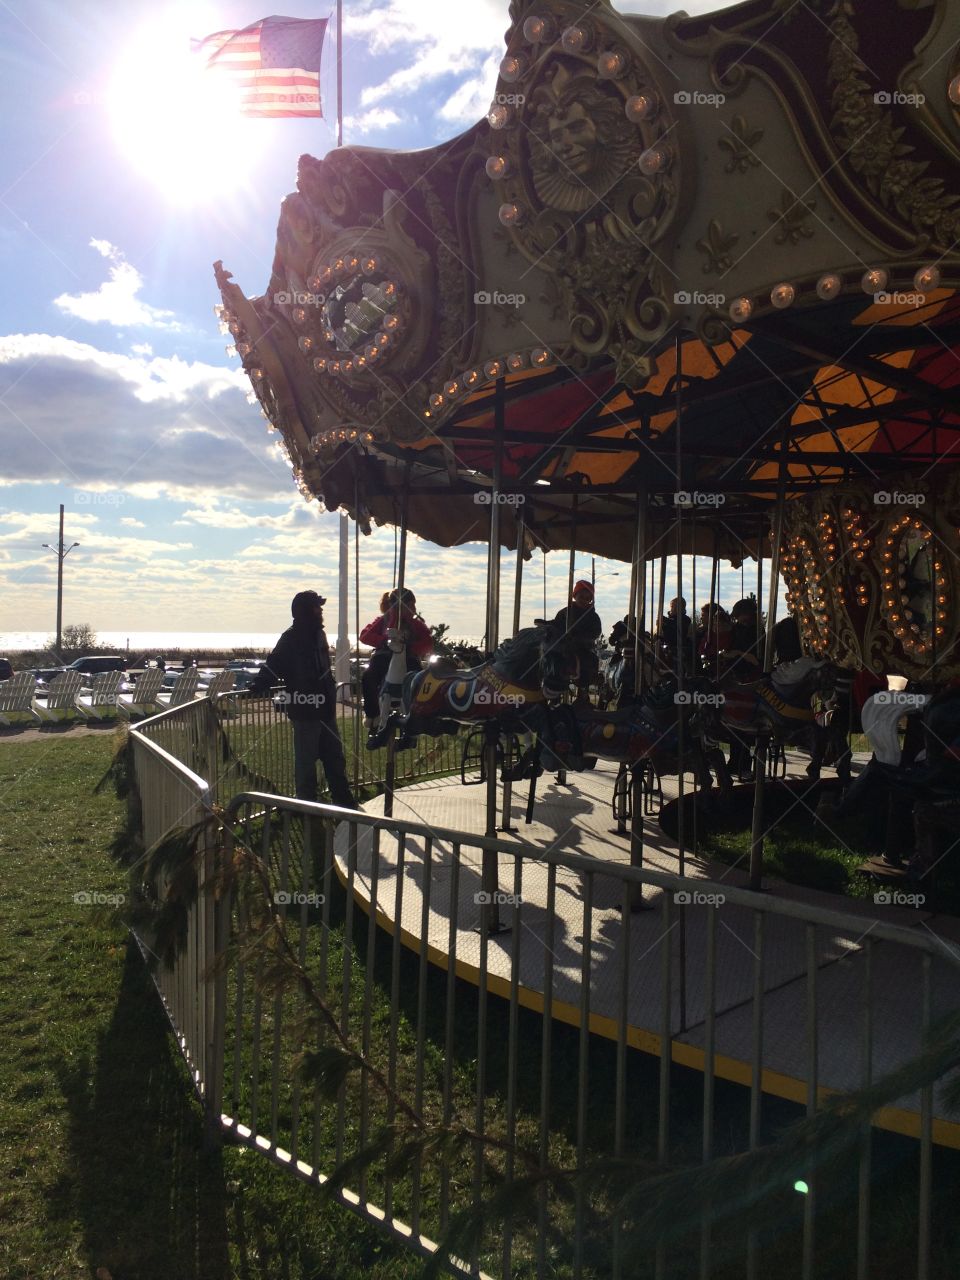 Carousel in Cape May